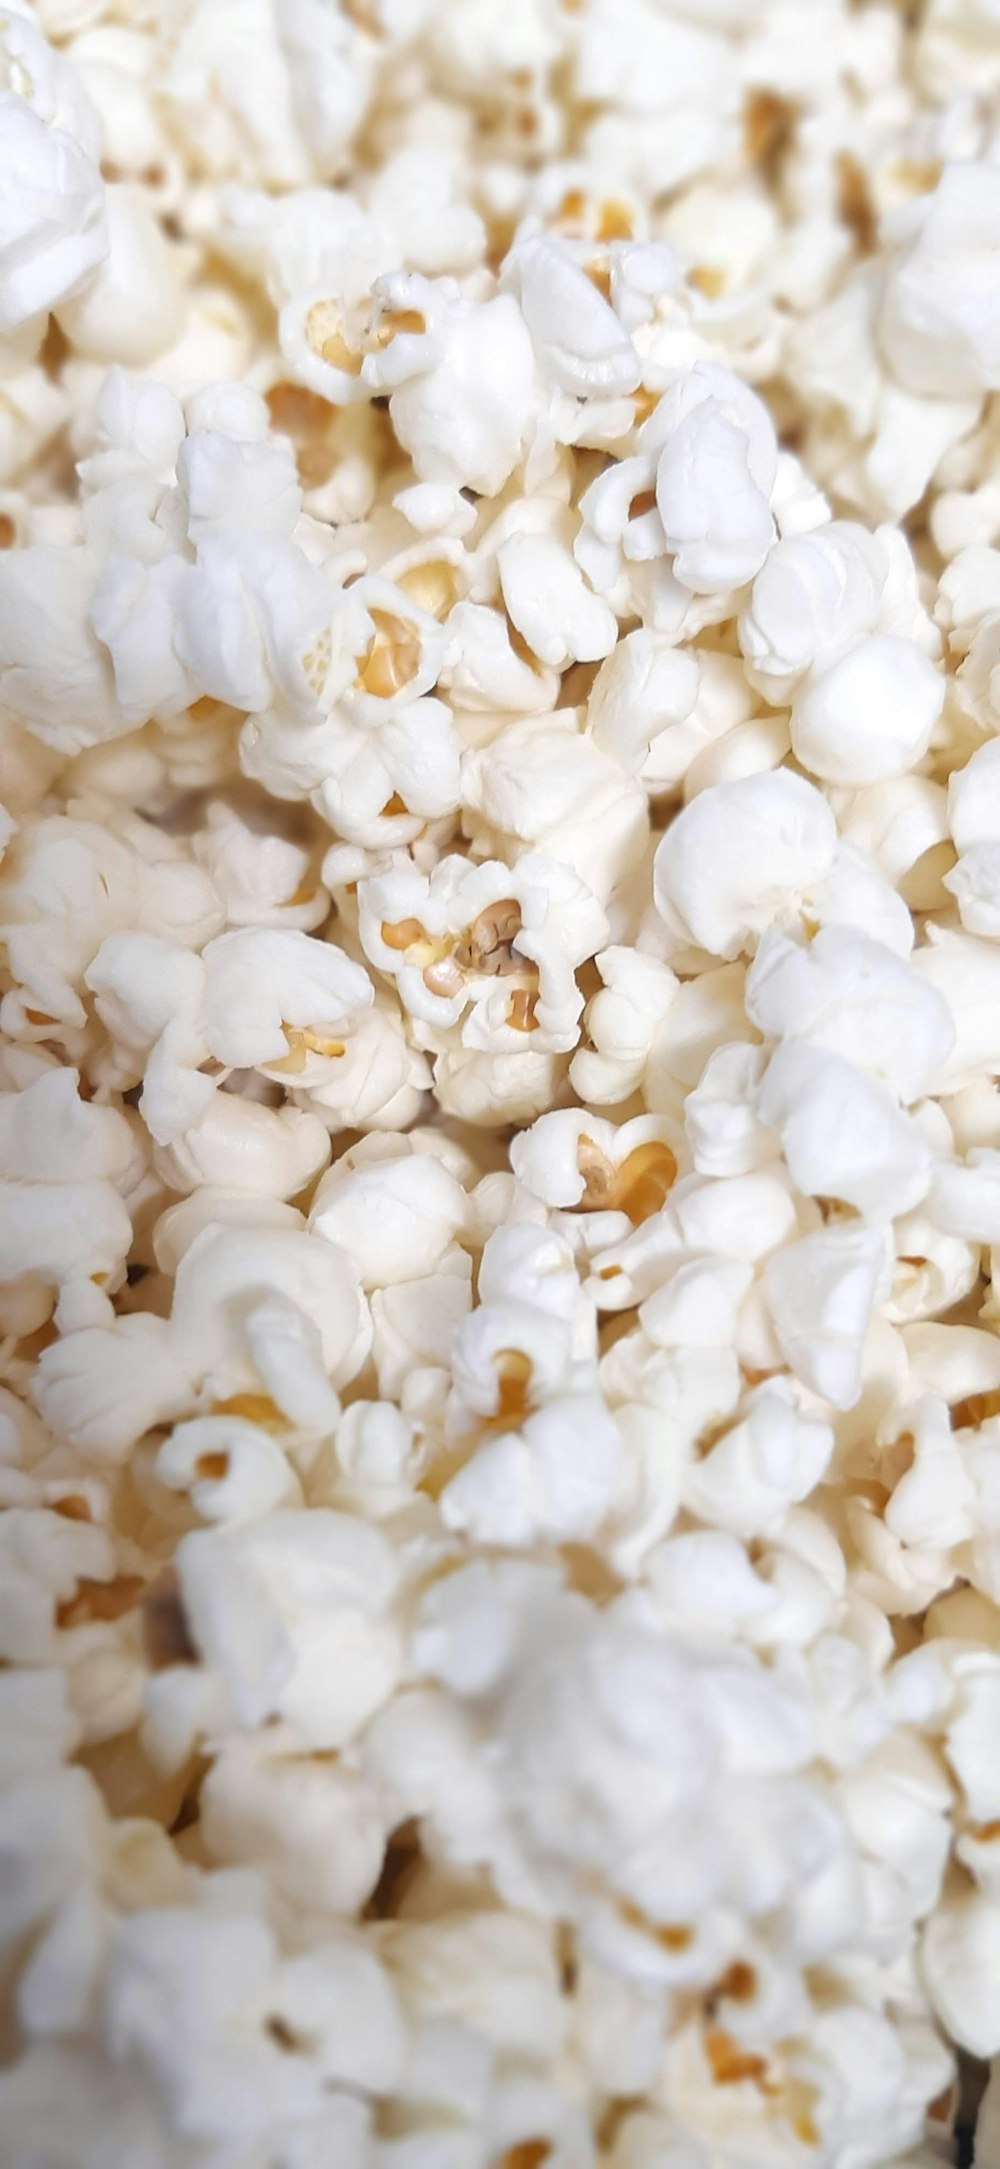 white popcorn in close up photography